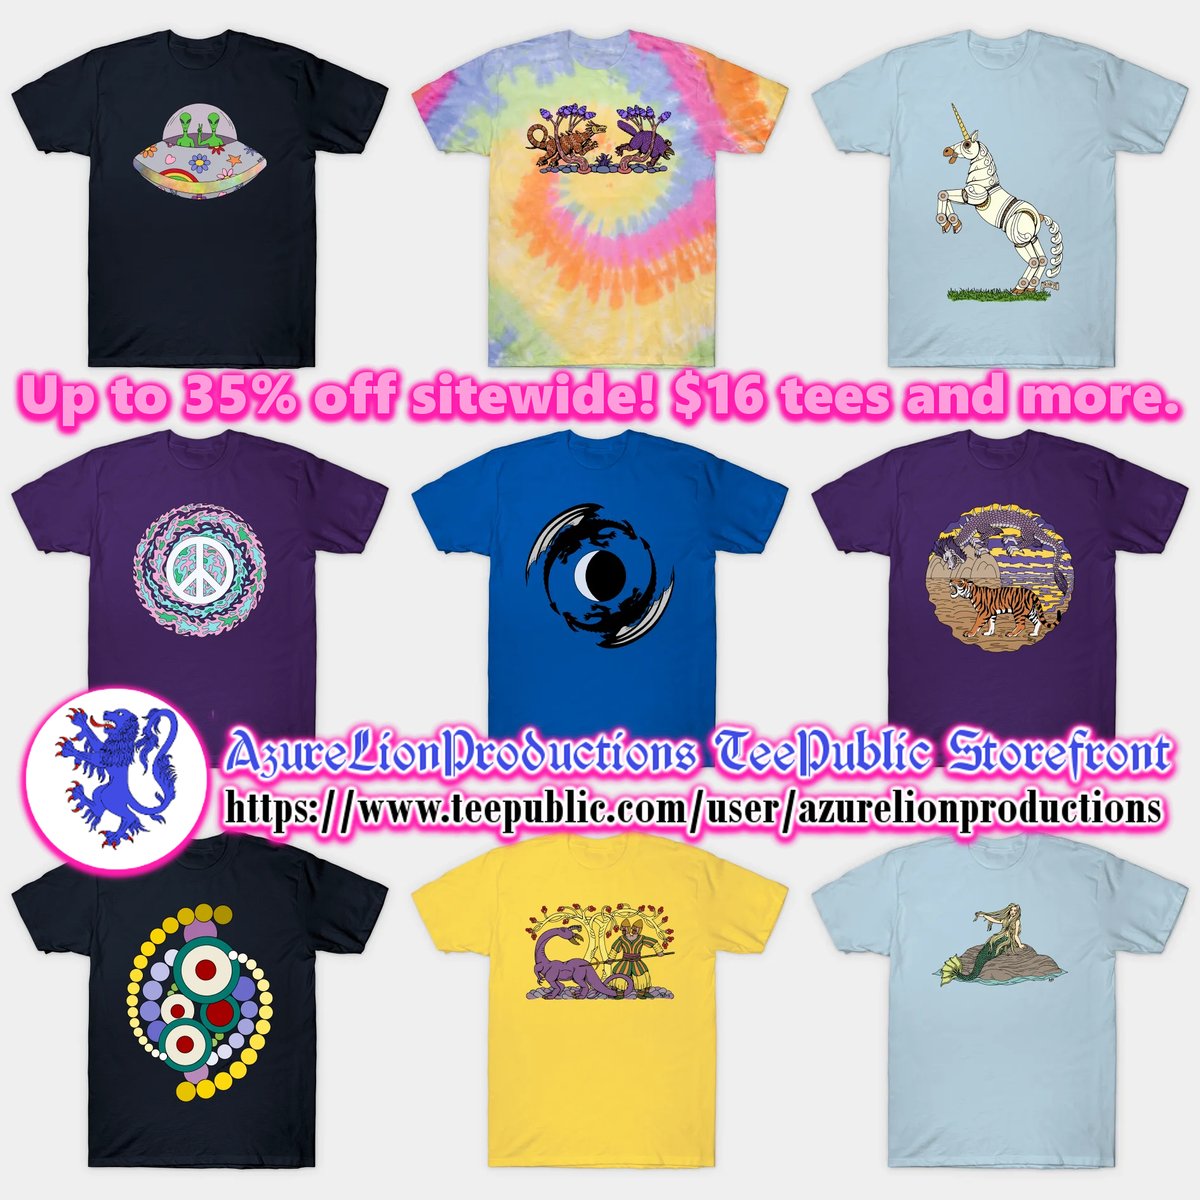 FINAL HOURS!

For a limited time over at TeePublic...

Up to 35% off sitewide! $16 tees and more.

Check out my designs at TeePublic! tee.pub/lic/-TNDl5jomGs 

#TeePublic